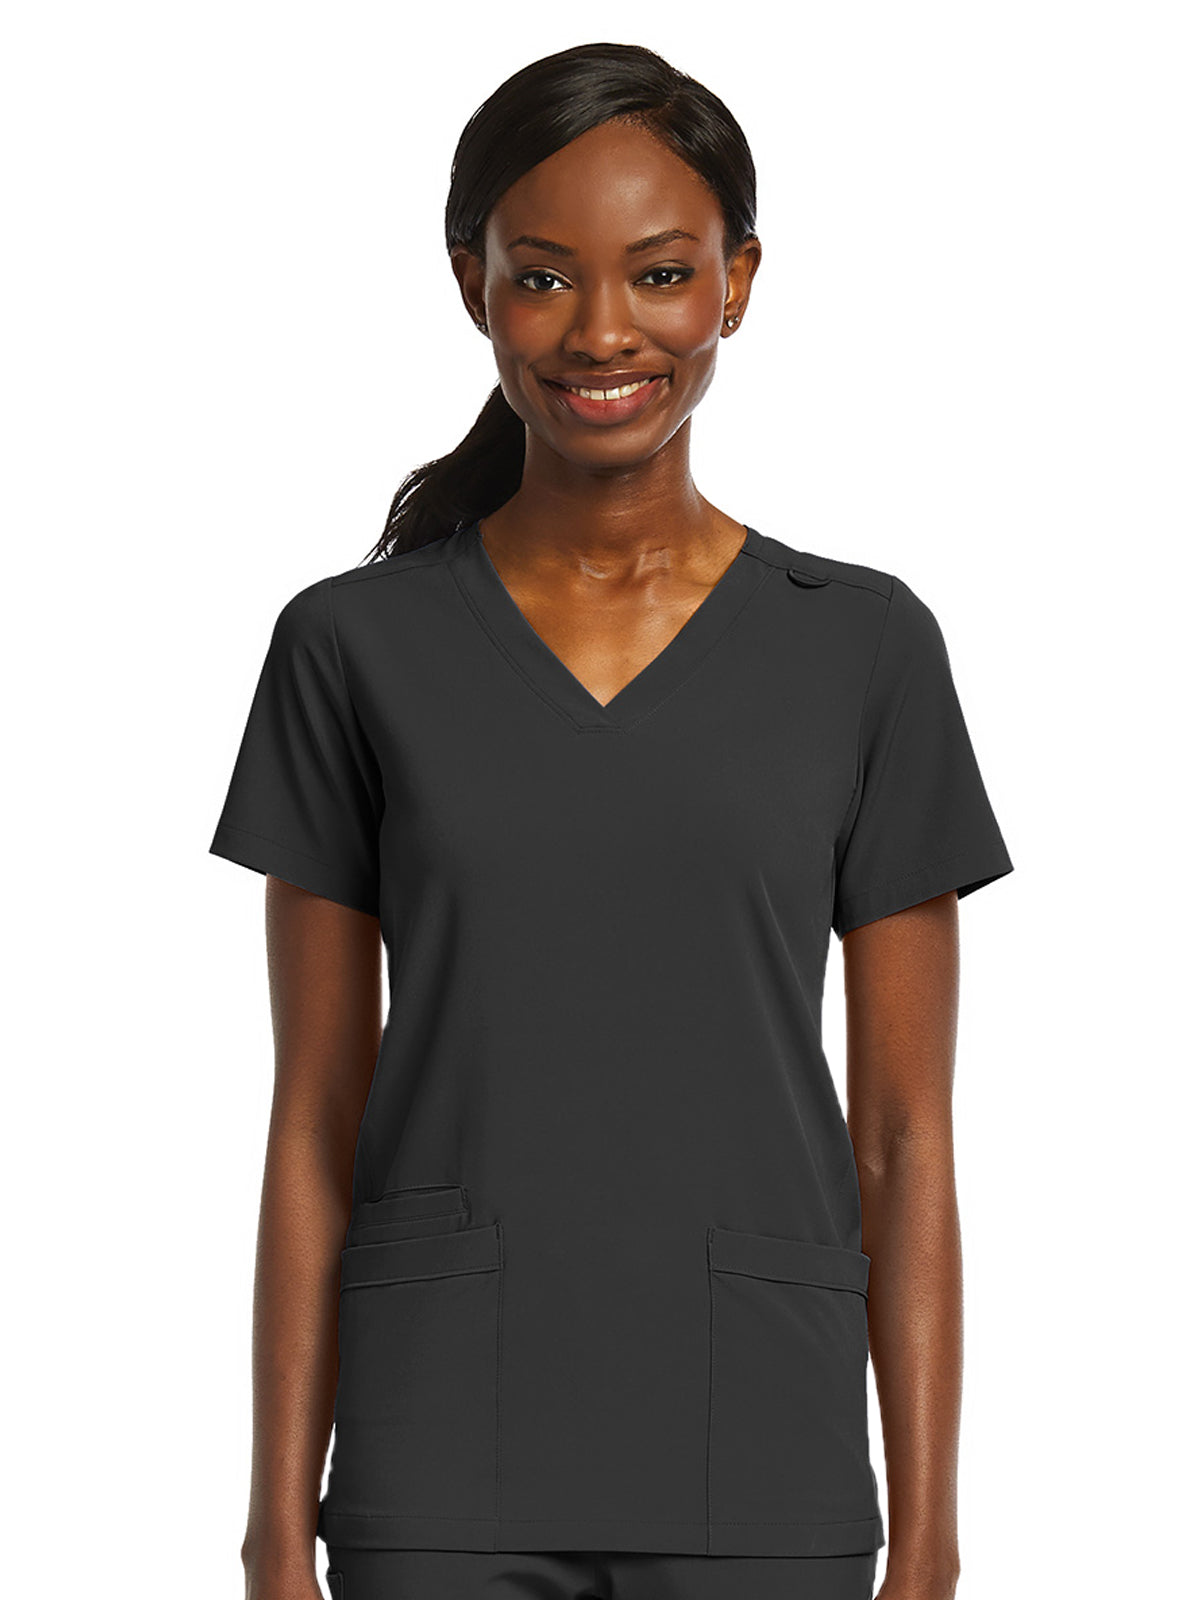 Women's Fitted Two-Pocket V-Neck Scrub Top